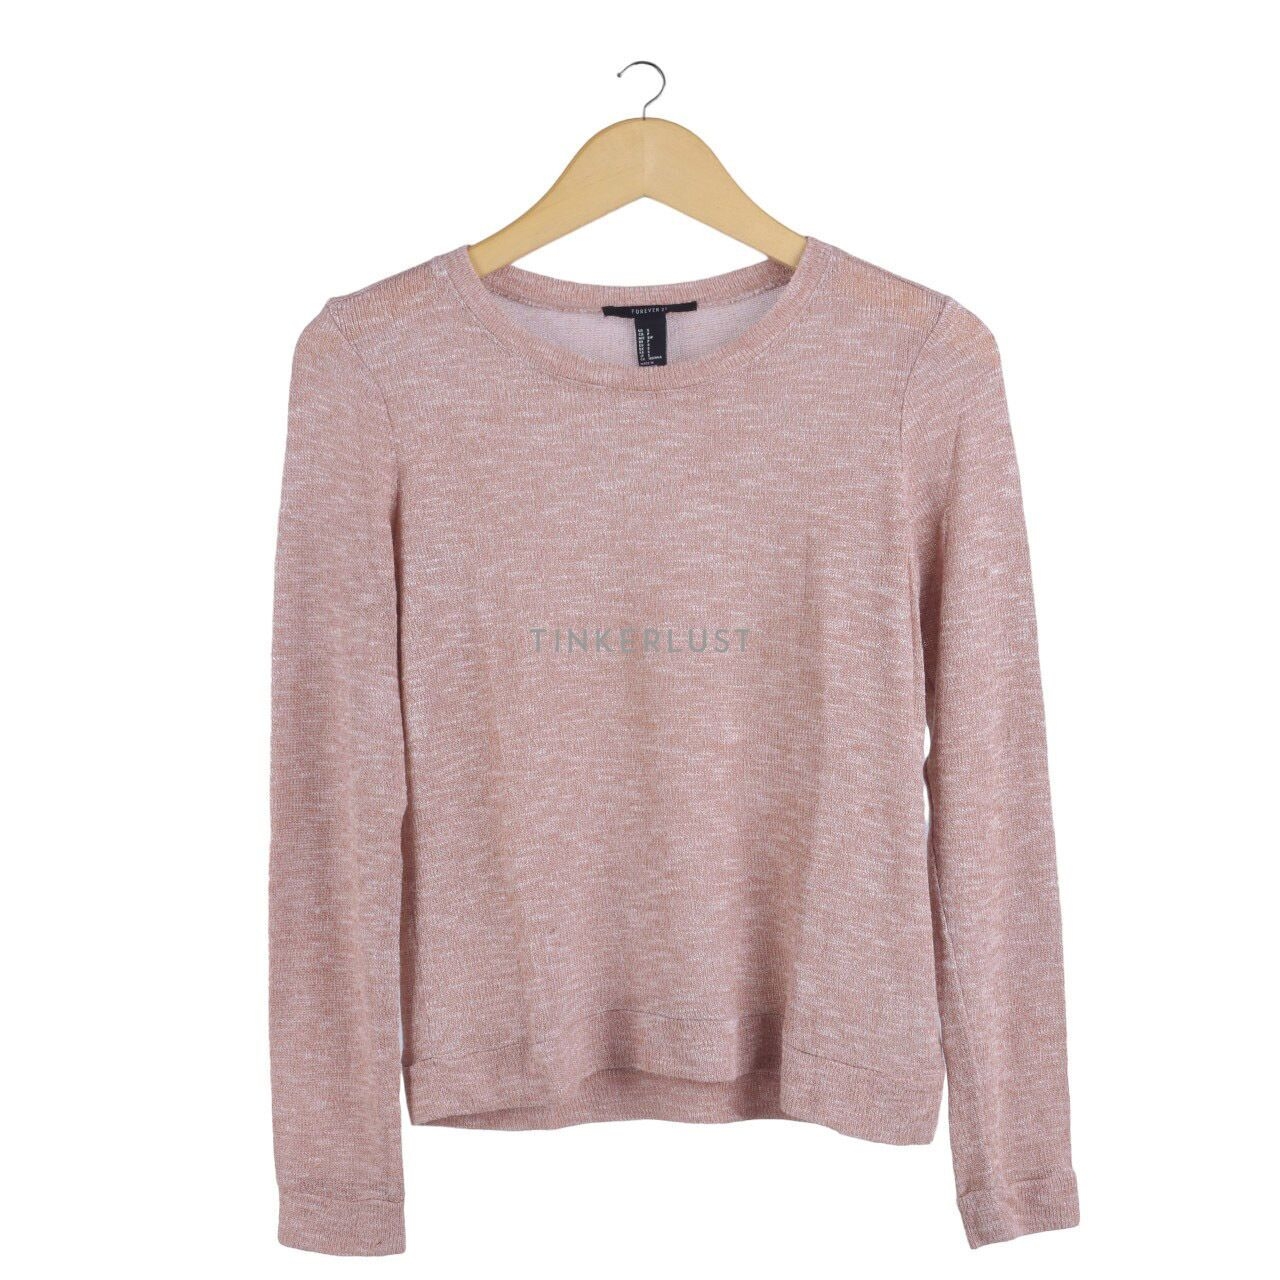 Forever 21 Nude Sweater